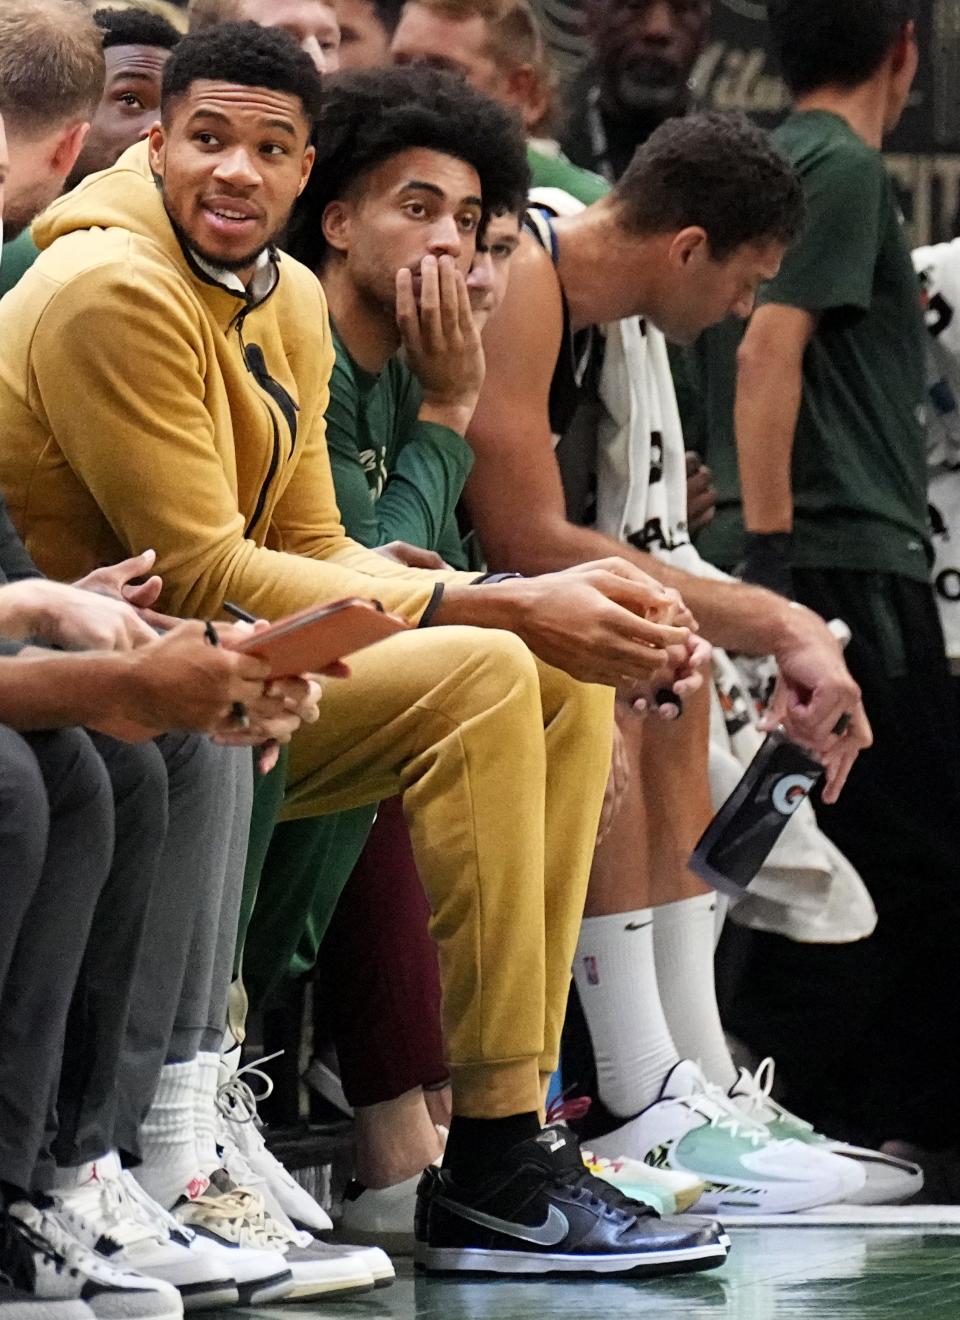 Milwaukee Bucks forward Giannis Antetokounmpo watches  from the bench during the first half of their game against the Oklahoma City Thunder Saturday, November 5, 2022 at Fiserv Forum in Milwaukee, Wis.